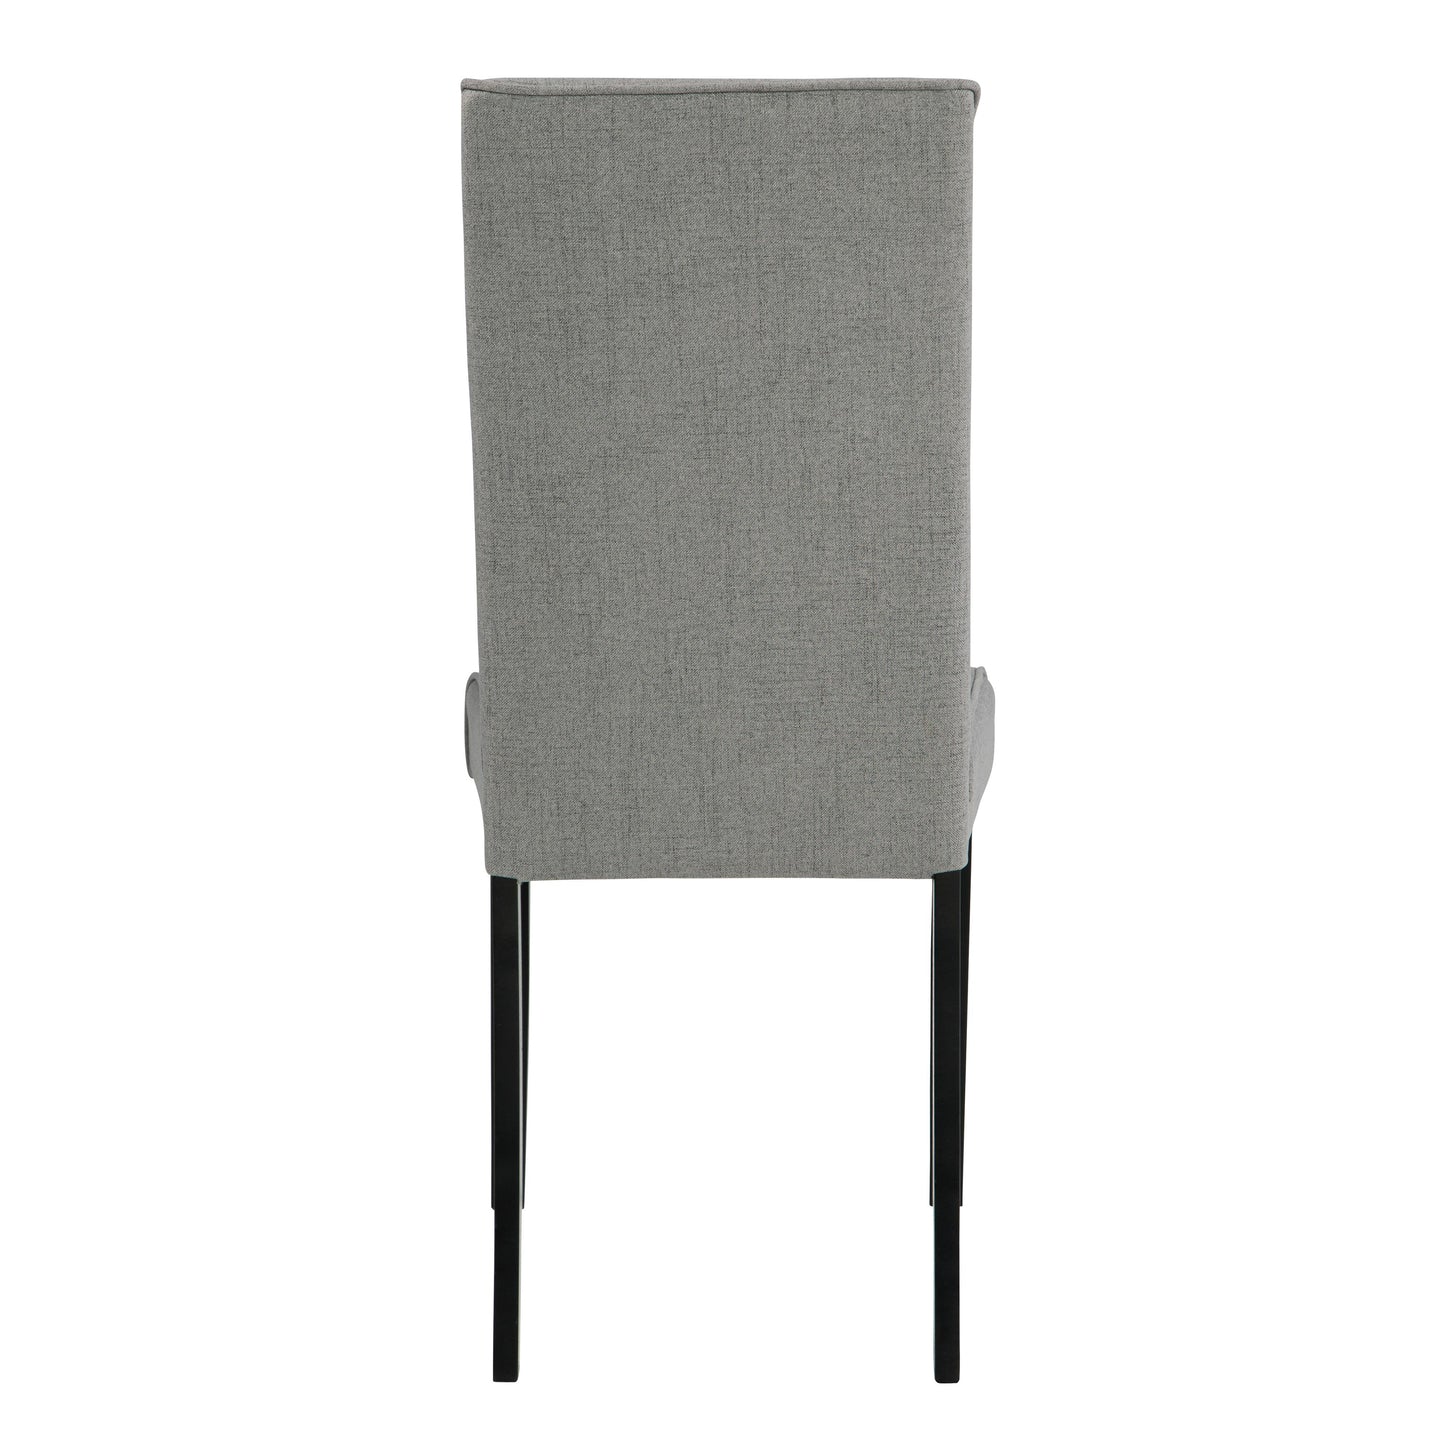 Signature Design by Ashley Kimonte Dining Chair D250-06